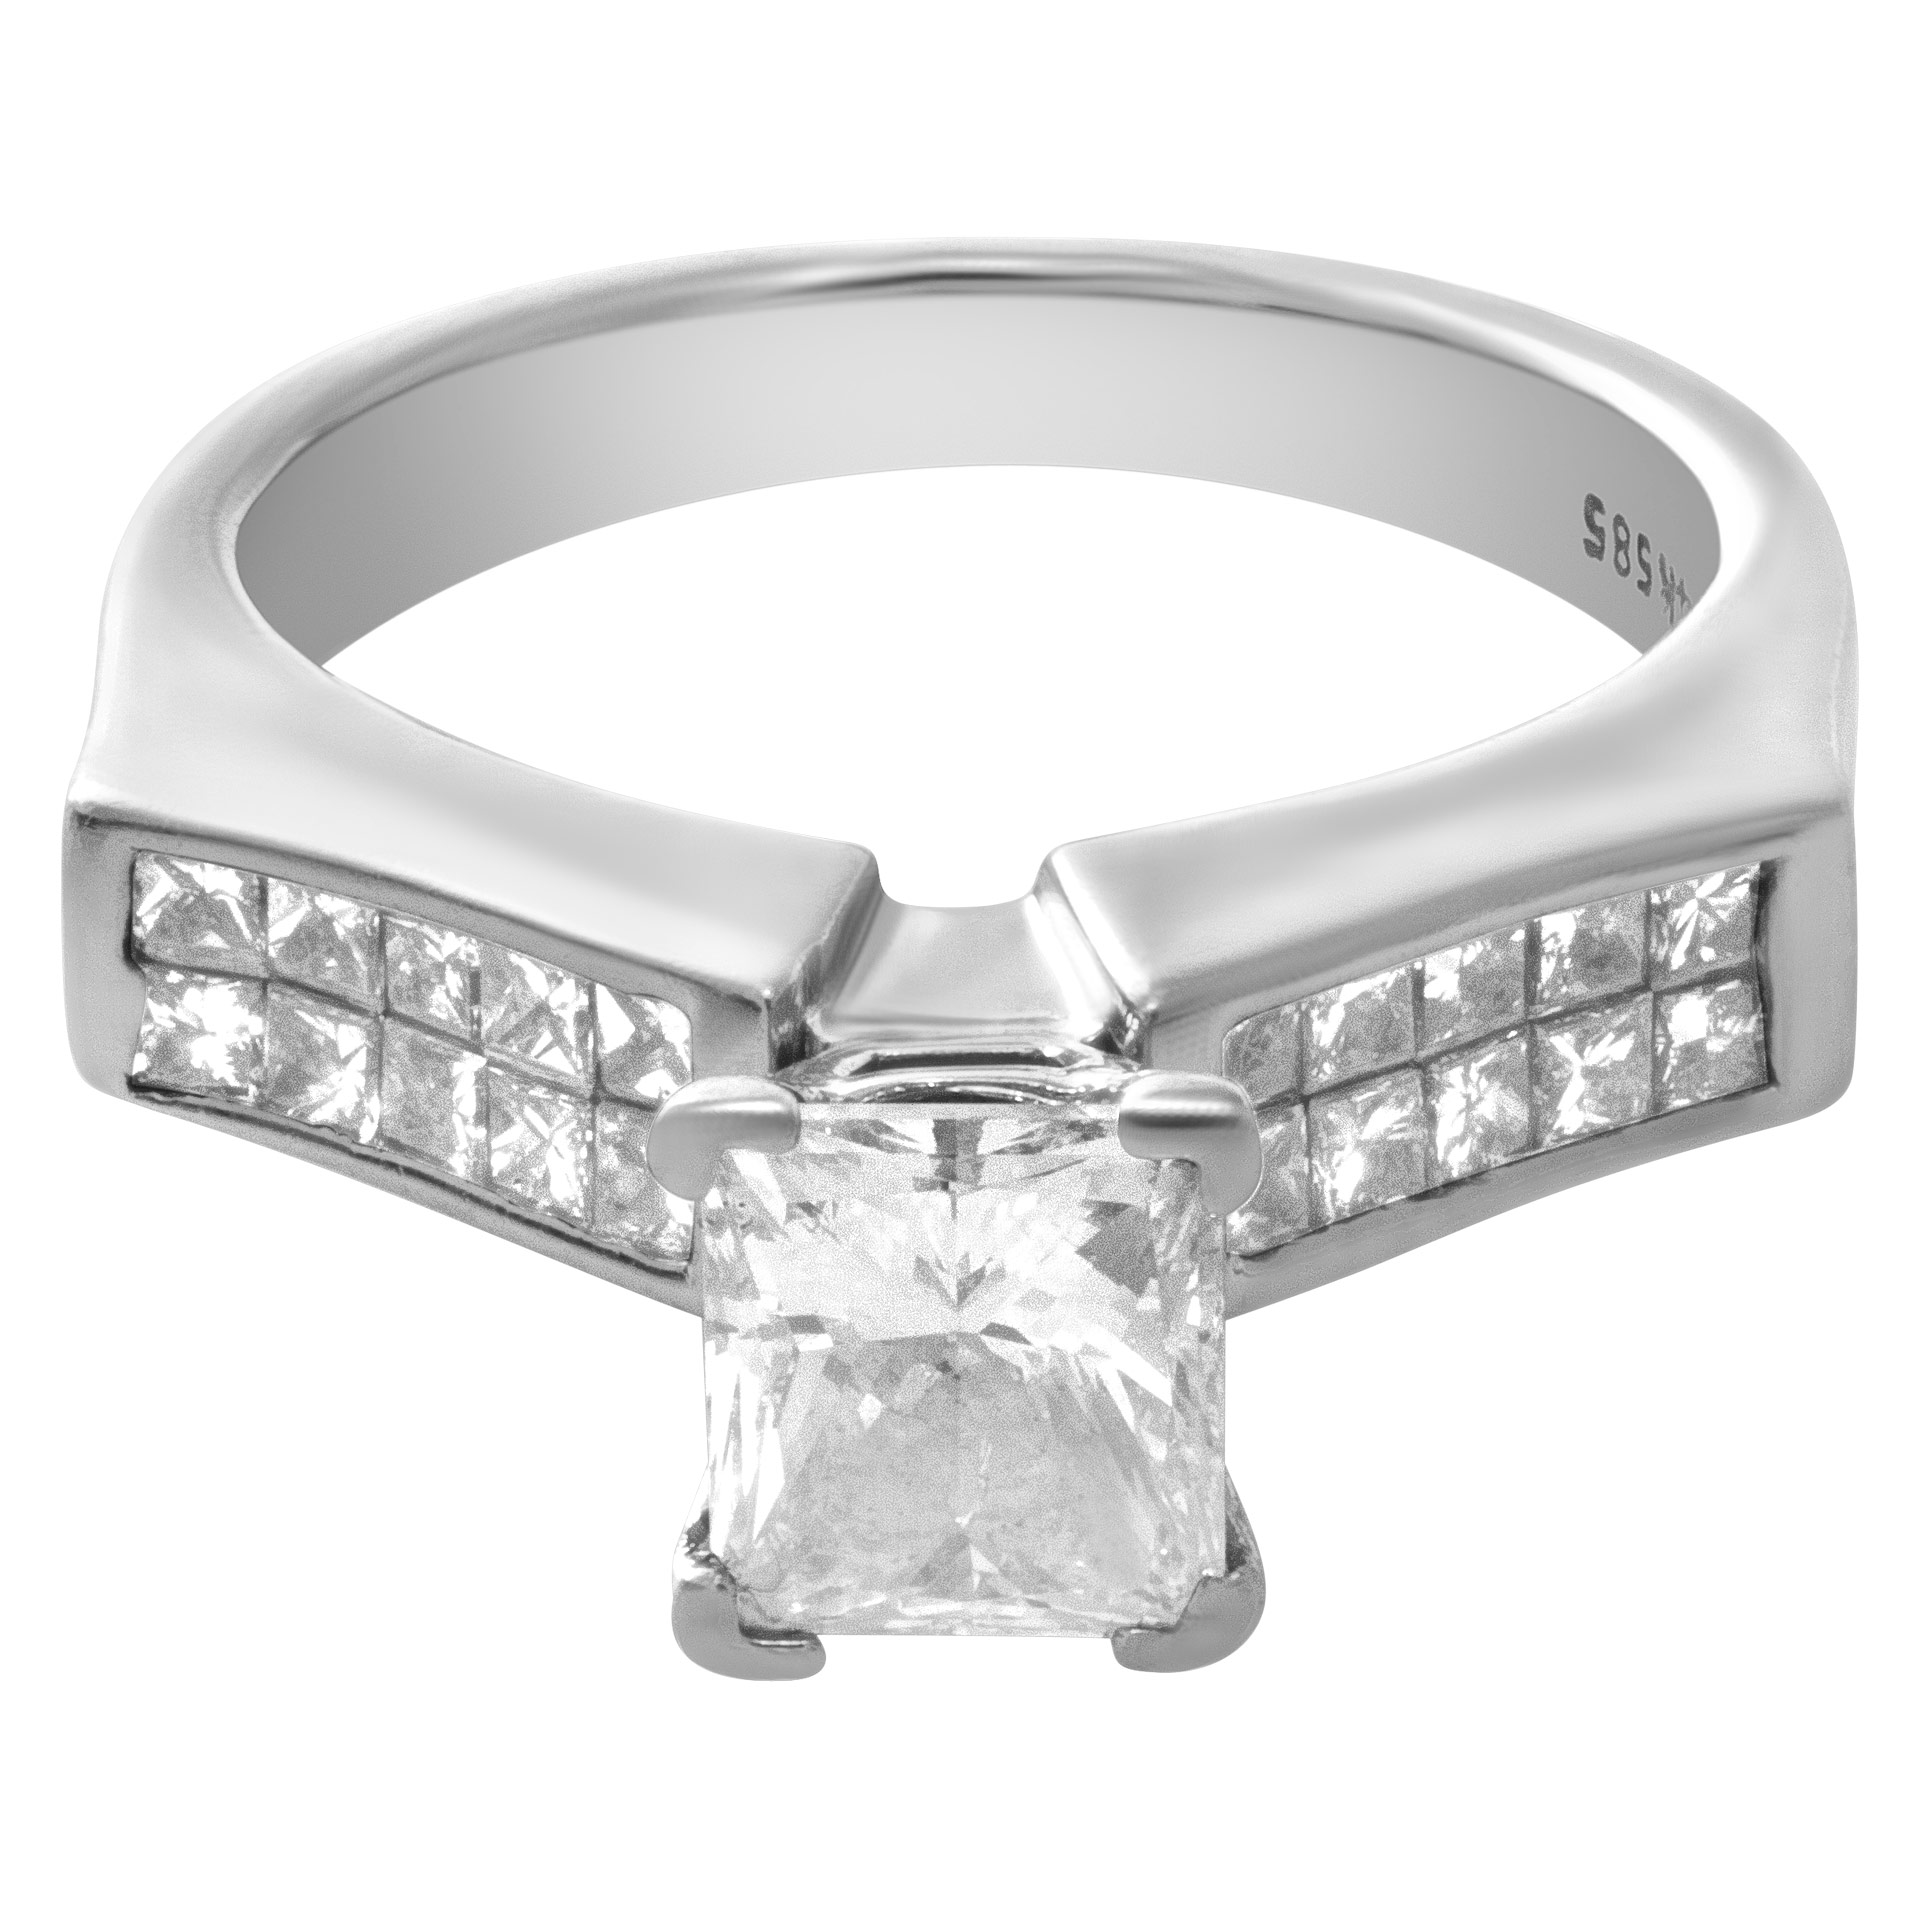 GIA certified diamond engagement ring with 1.01cts rectangular diamond (F color, SI2 clarity) set in 14k white gold image 4